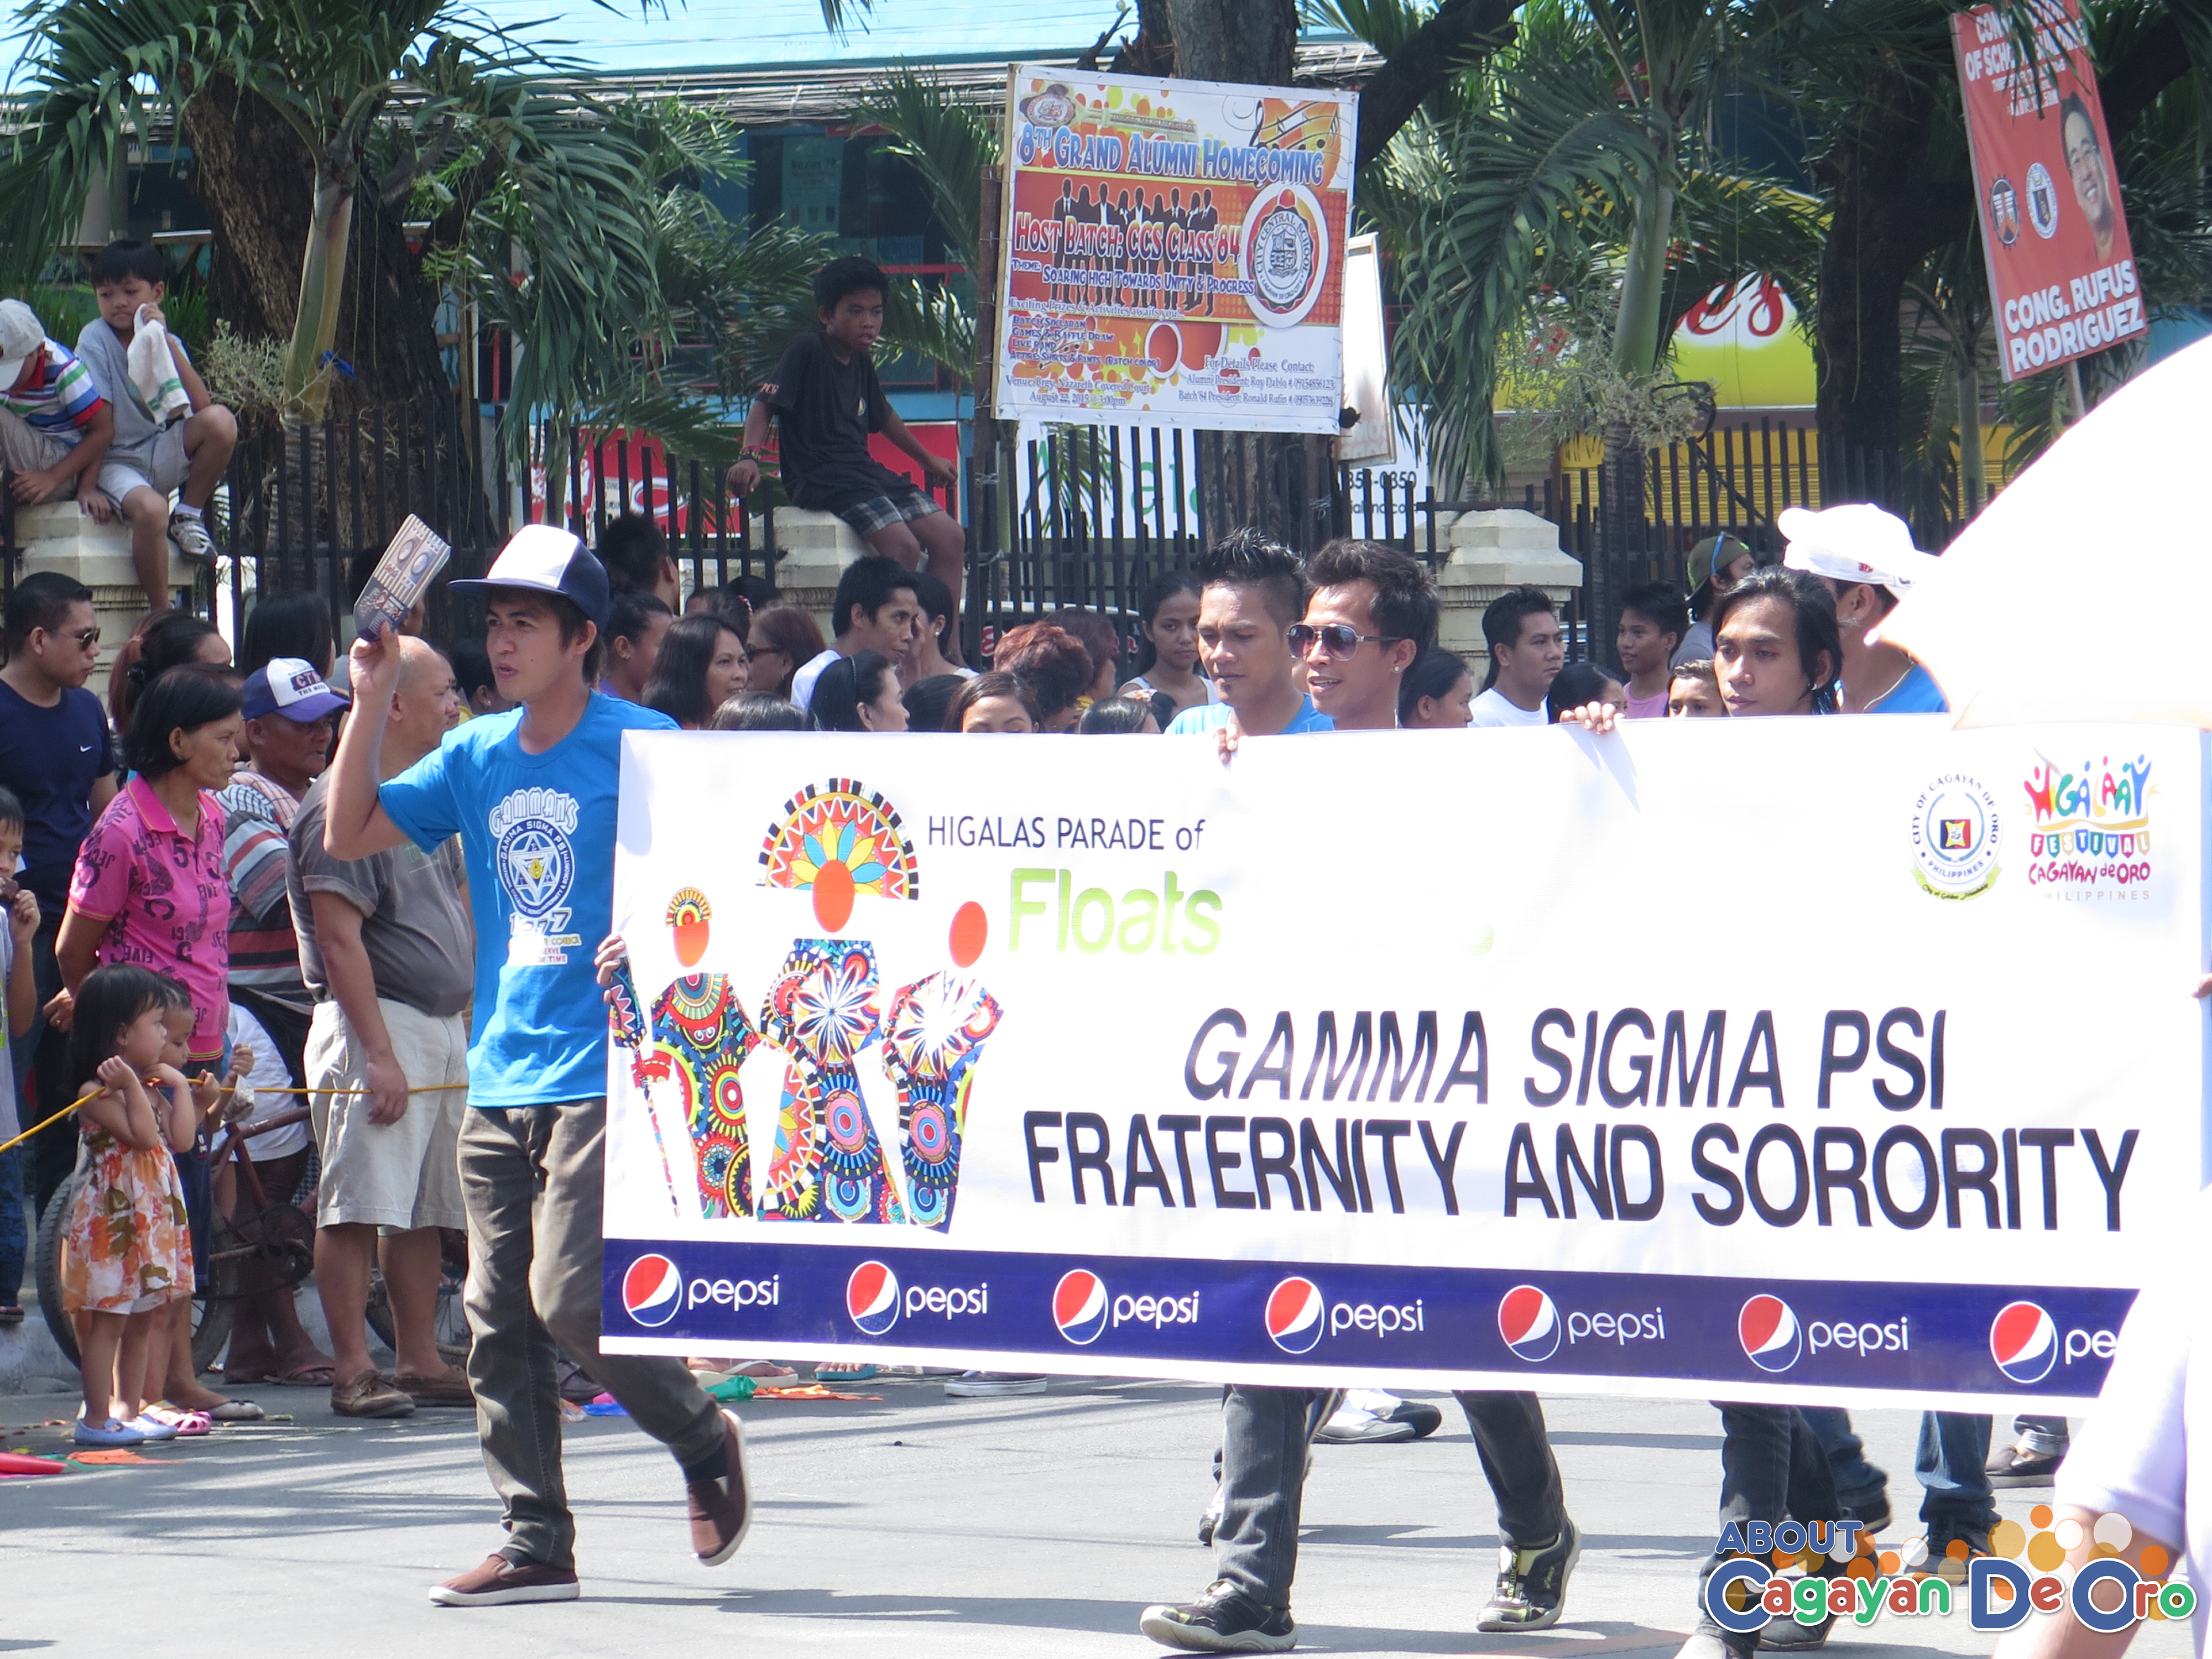 Gamma Sigma Psi Fraternity and Sorority at Cagayan de Oro The Higalas Parade of Floats and Icons 2015